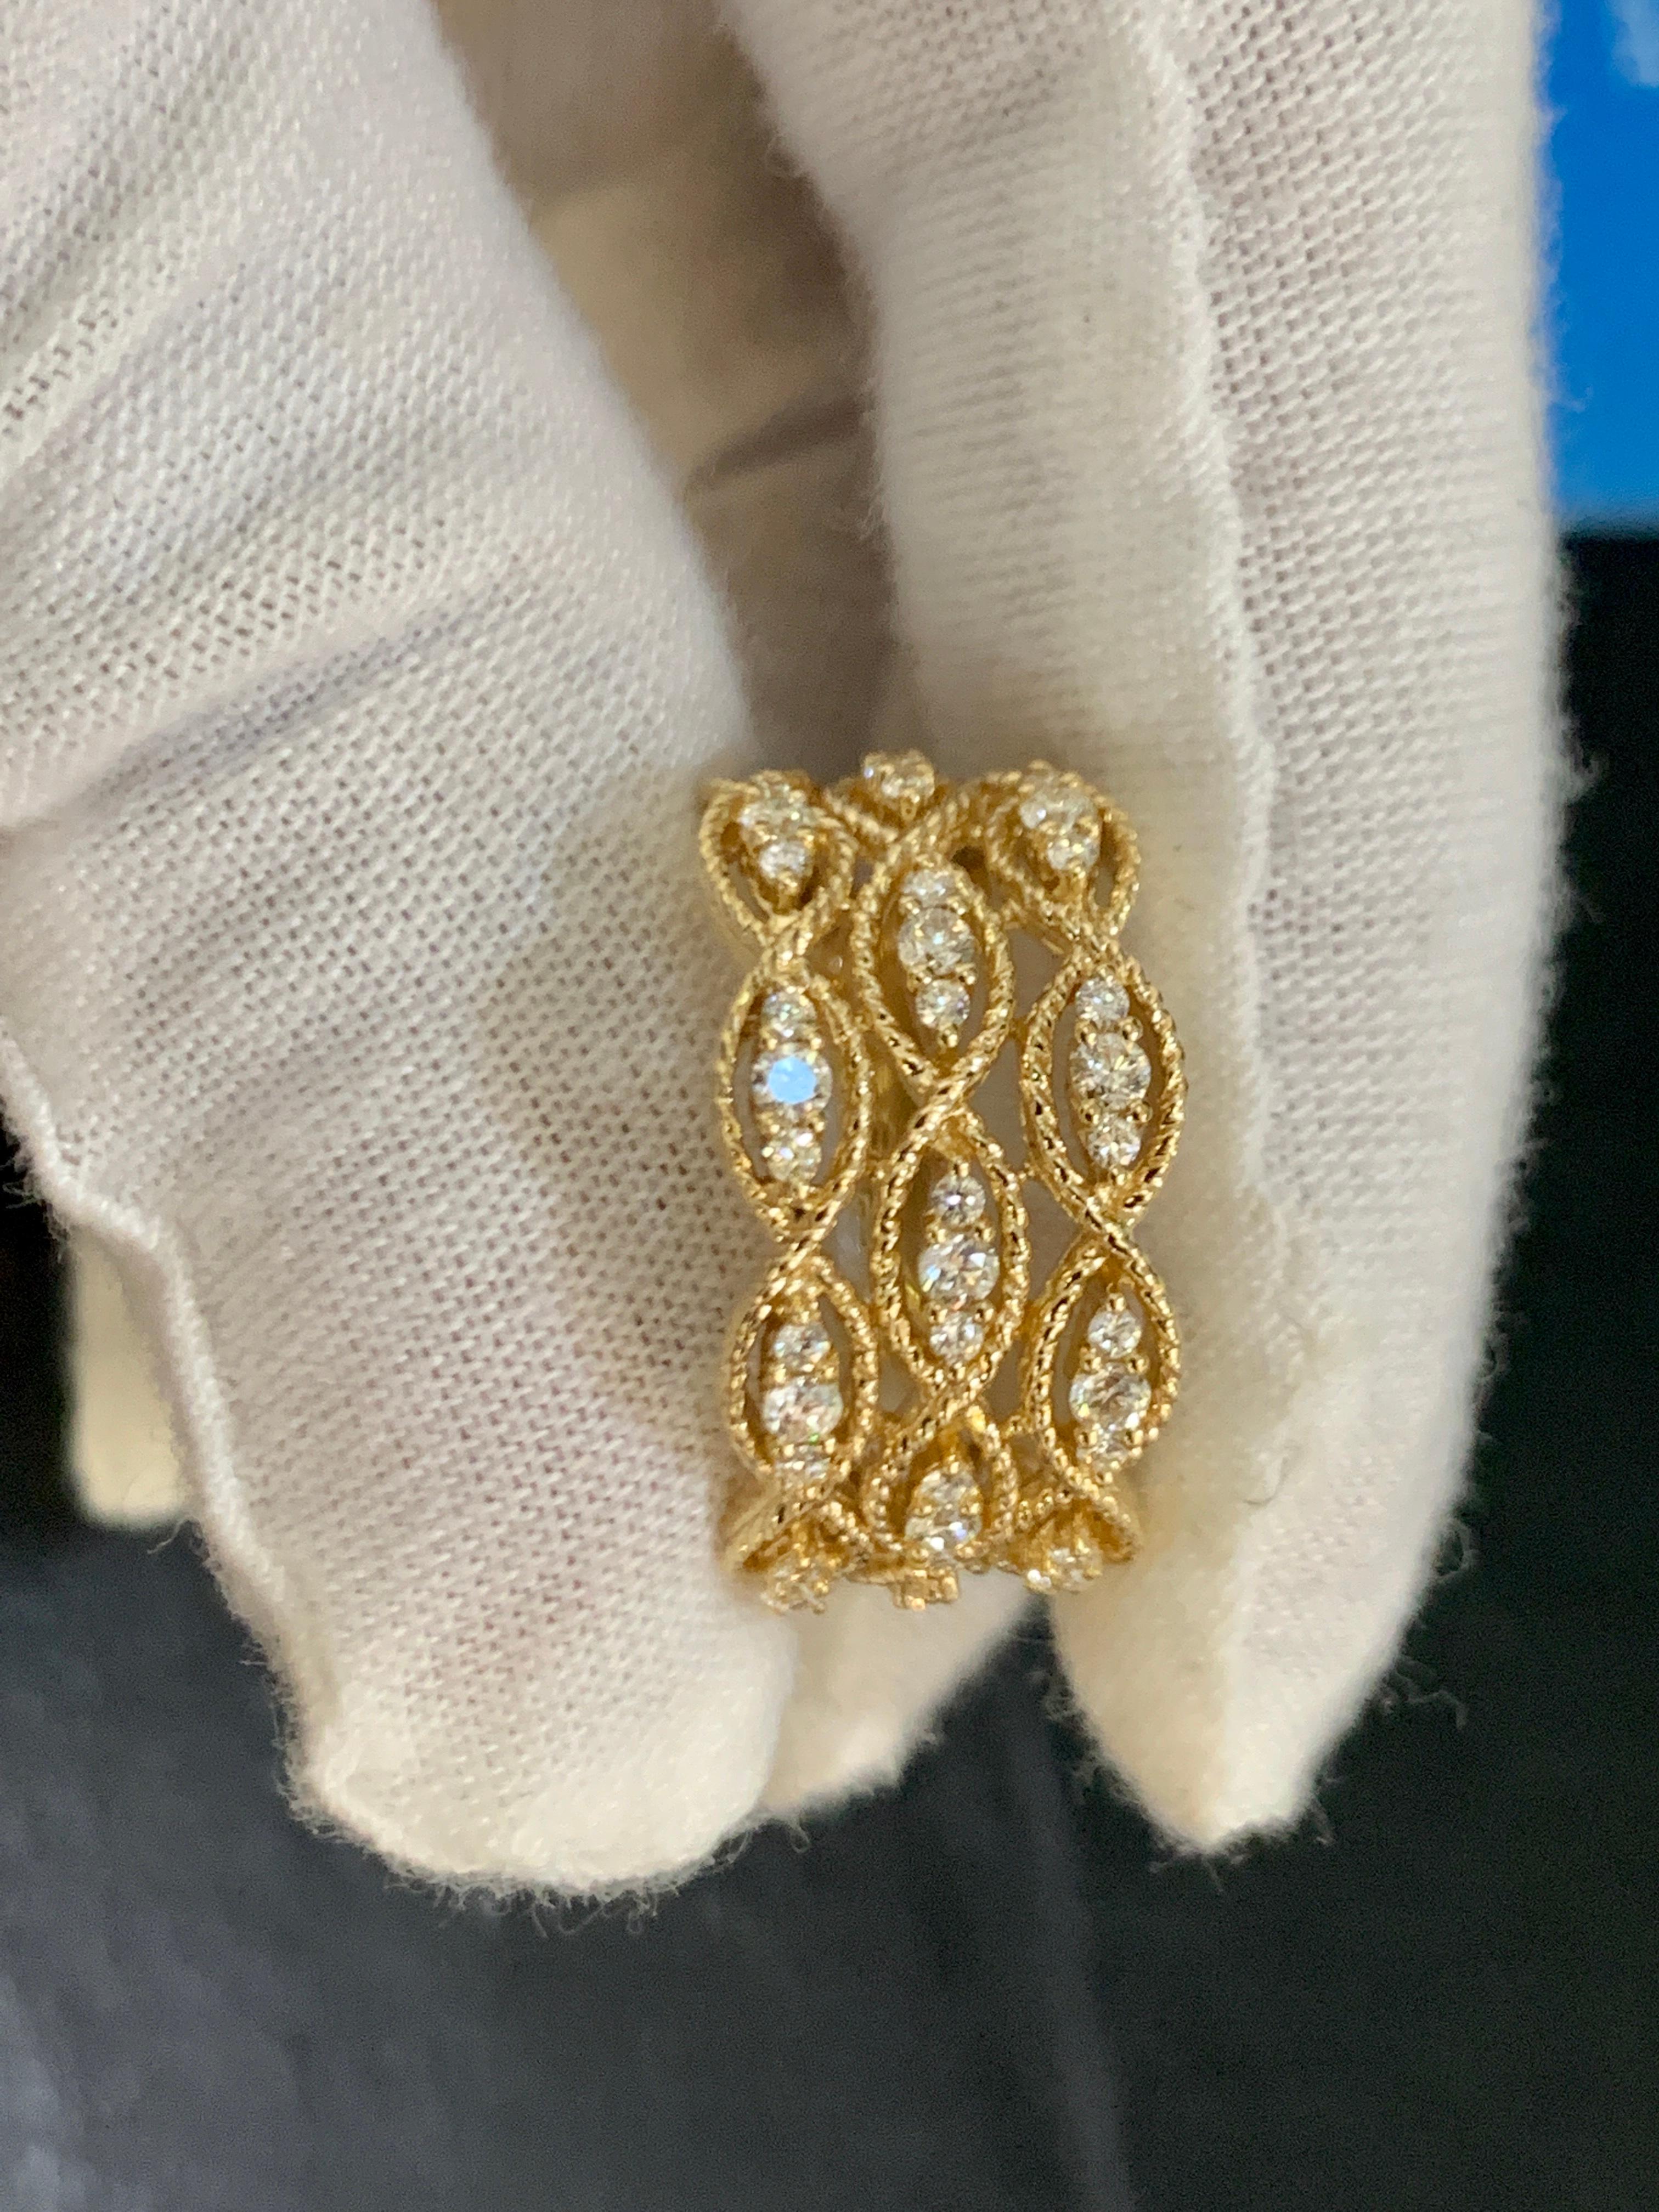  Designer Effy'S 0.51 Carat Diamond  Cocktail Ring 14 Karat Yellow  Gold Ring

Total  Approximately 0.51  Brilliant cut round diamonds 
Sparkle is unbelievable.
Diamond SI to VS  quality and G/H Color
This is a very affordable ring  from our